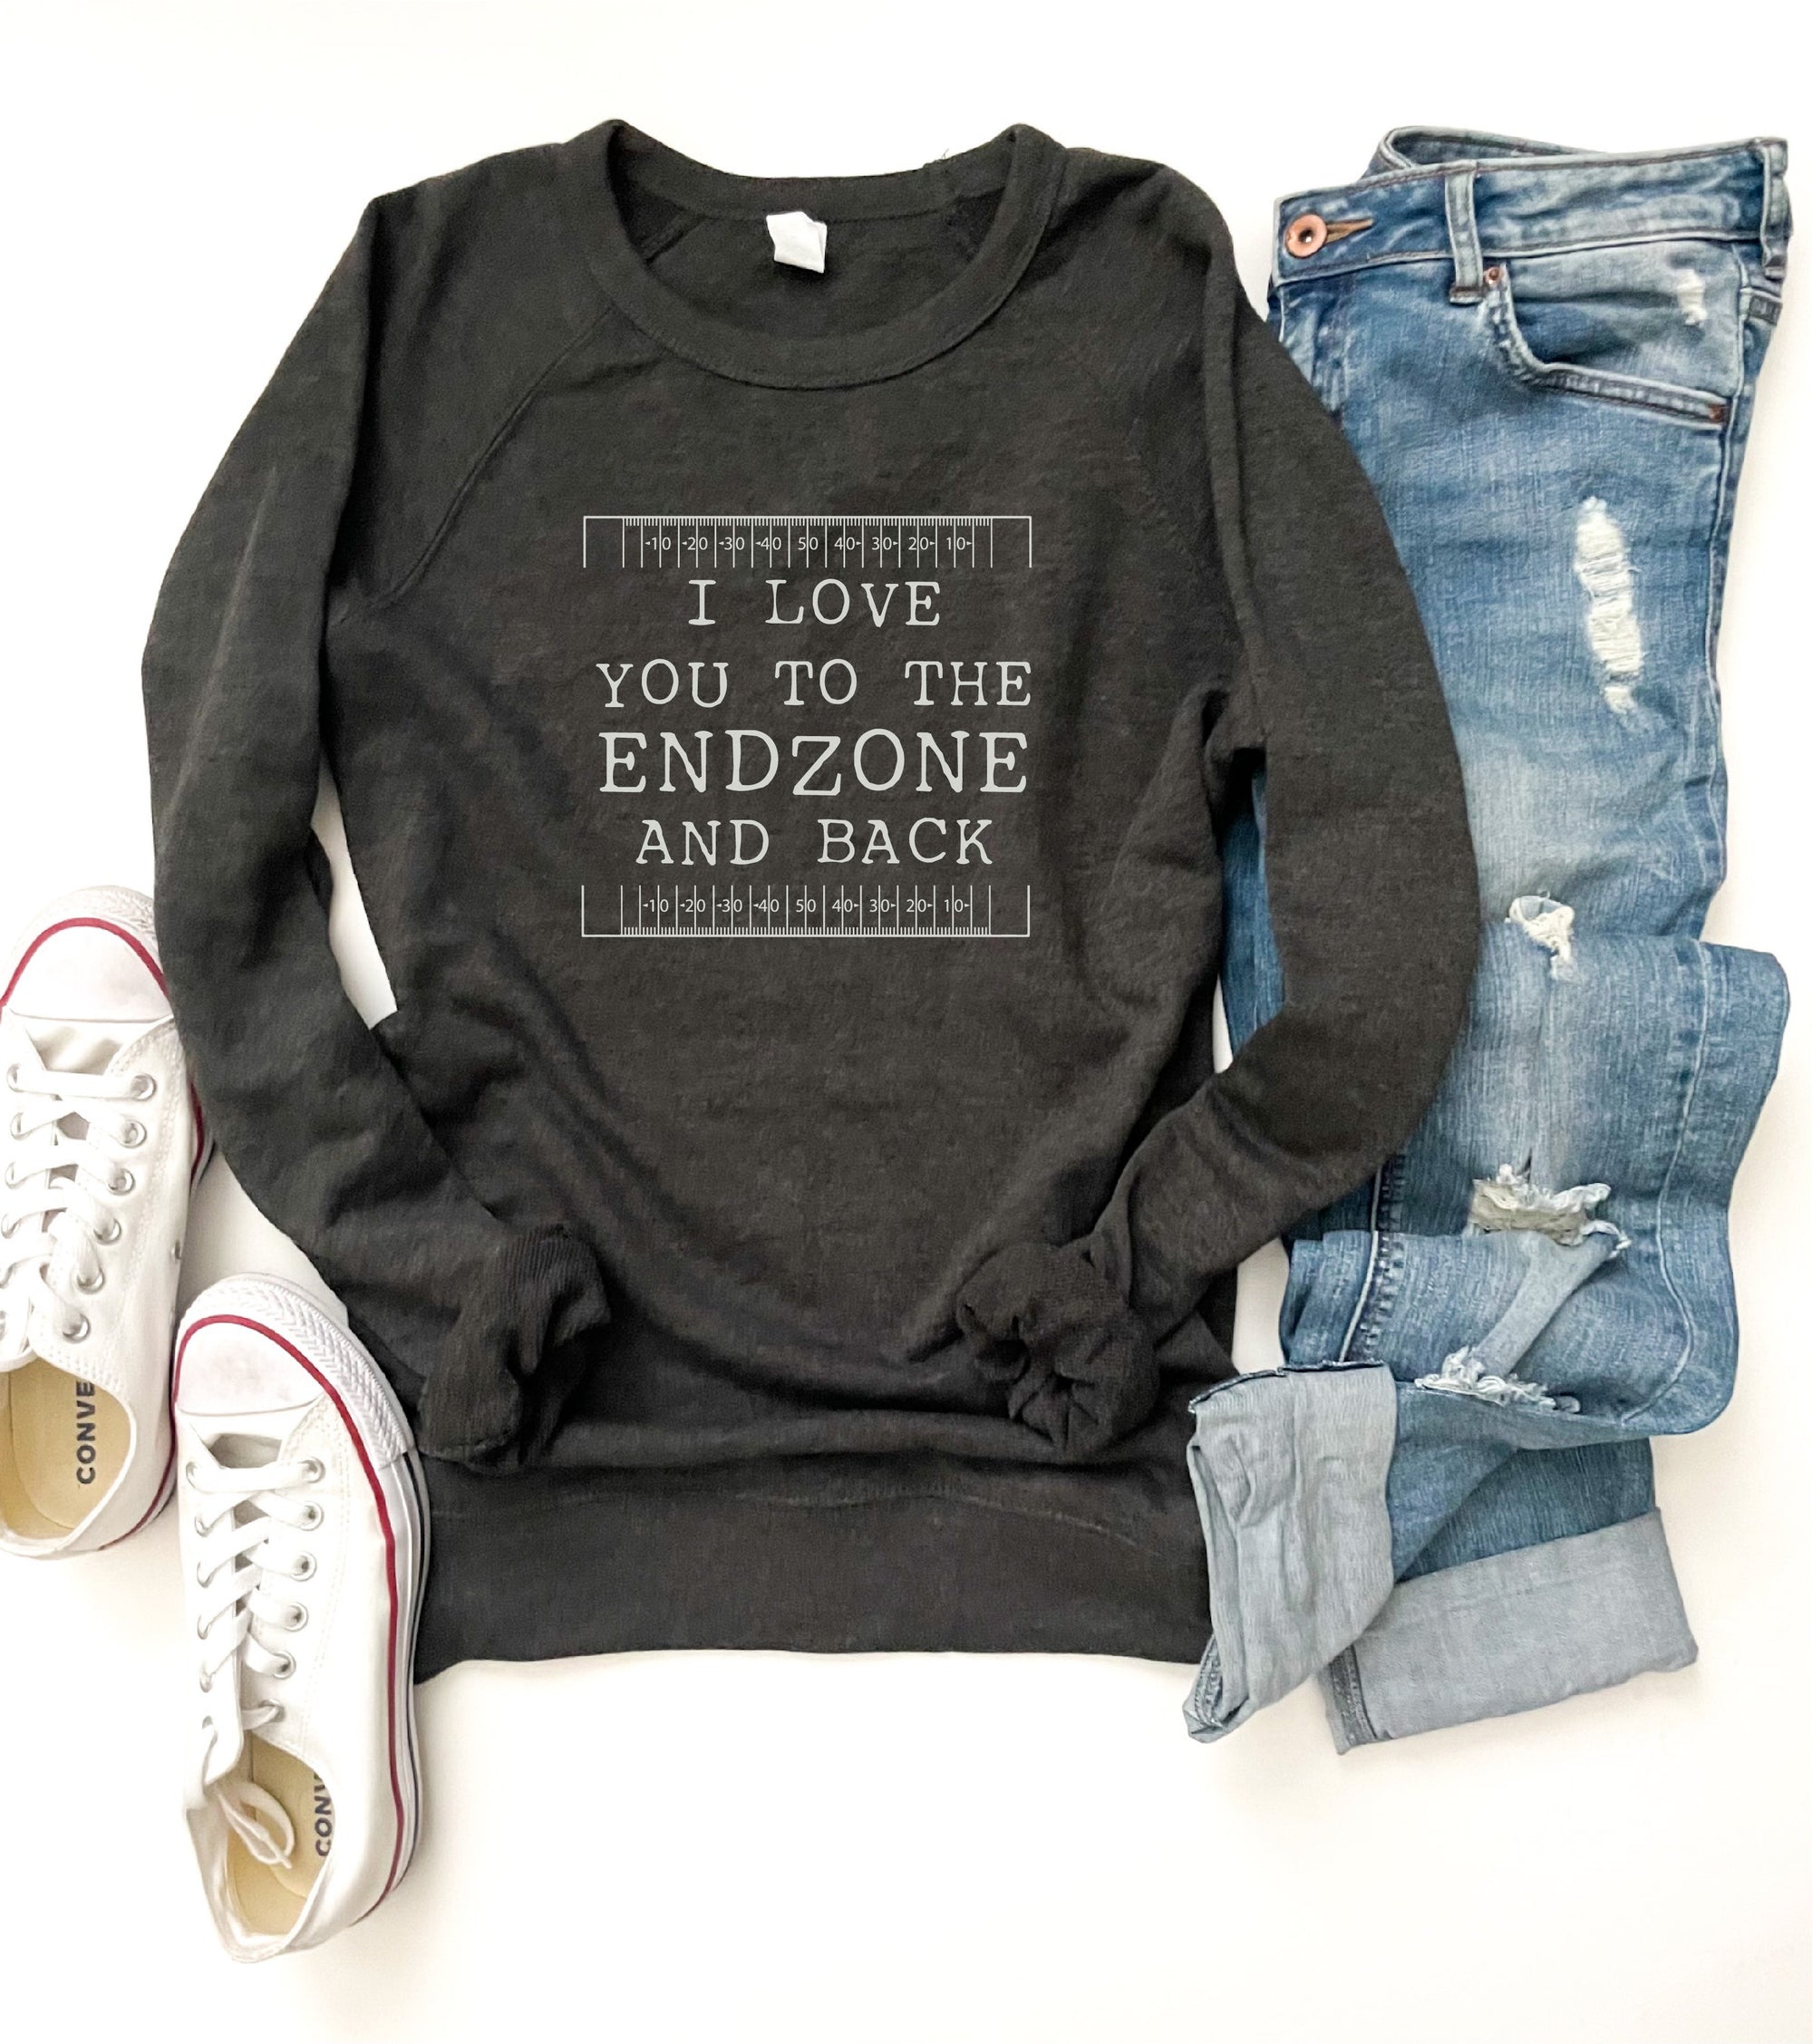 Love you to the endzone and back french terry Football french Terry Lane seven French Terry raglan charcoal 